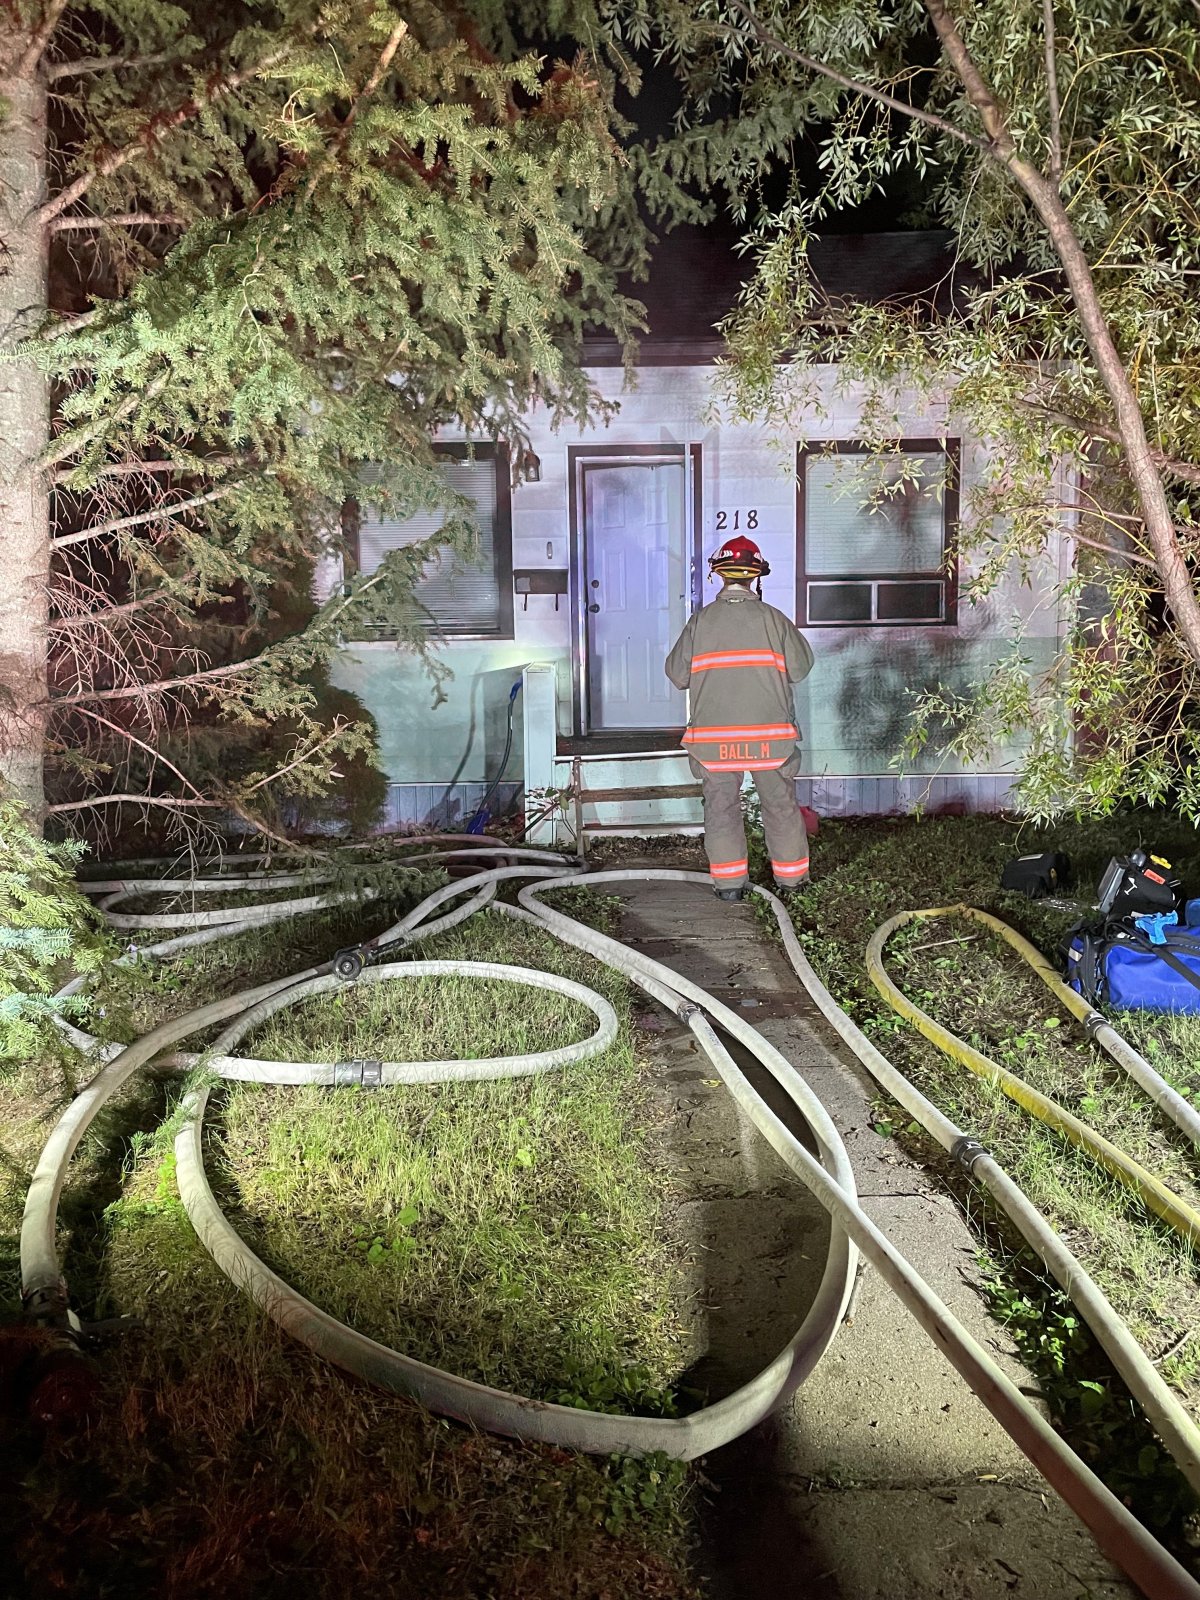 A woman was taken to hospital in Saskatoon on Sunday night after firefighters discovered her in the bedroom of a house that had a fire in the stairwell.